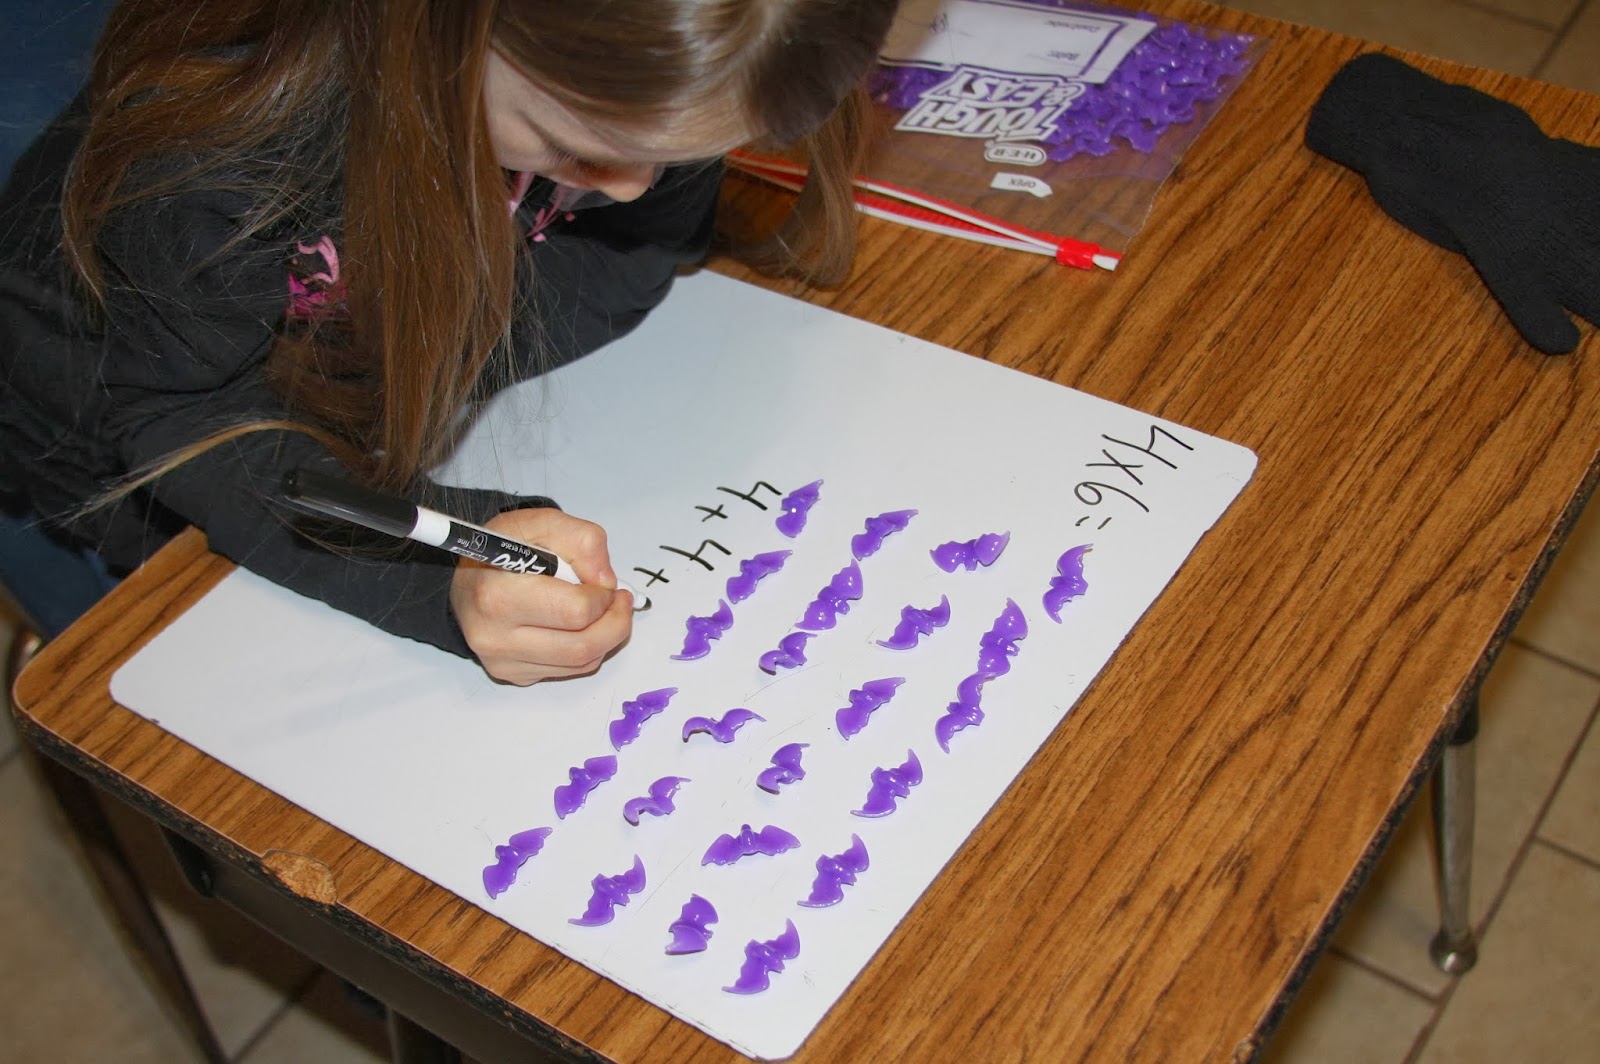 a-learning-journey-batty-about-multiplication-the-bats-go-marching-two-by-two